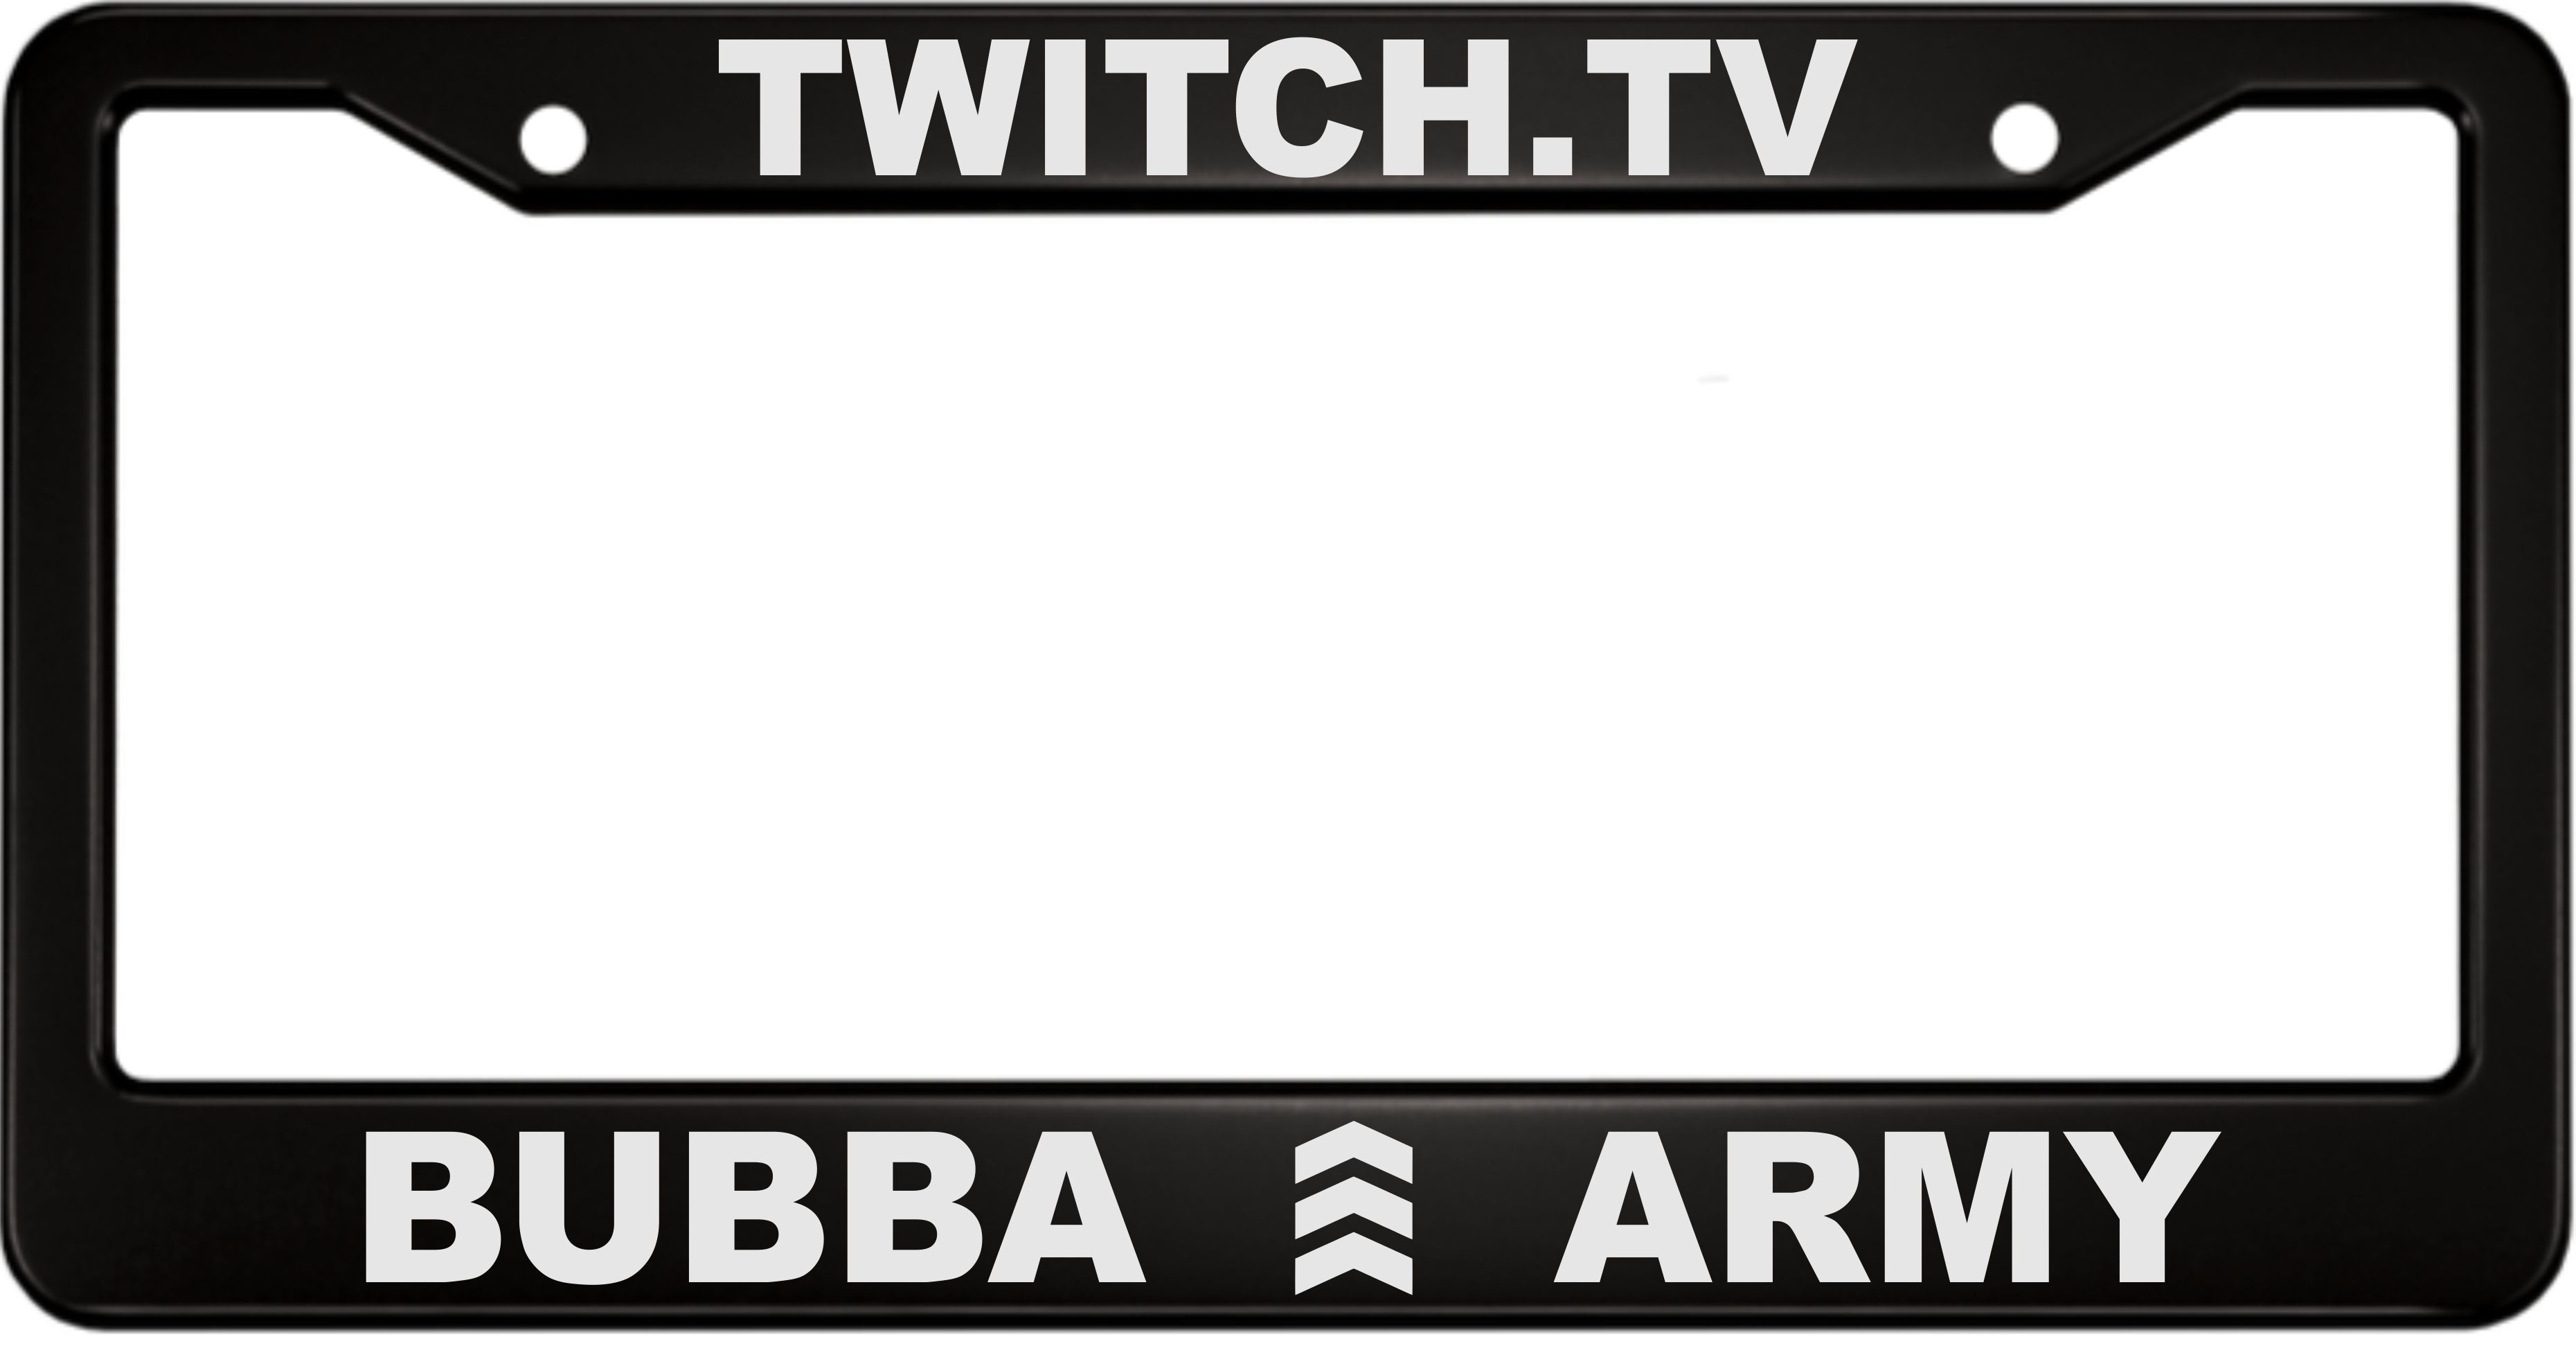 TWITCH.TV - Anodized Aluminum License Plate Frame